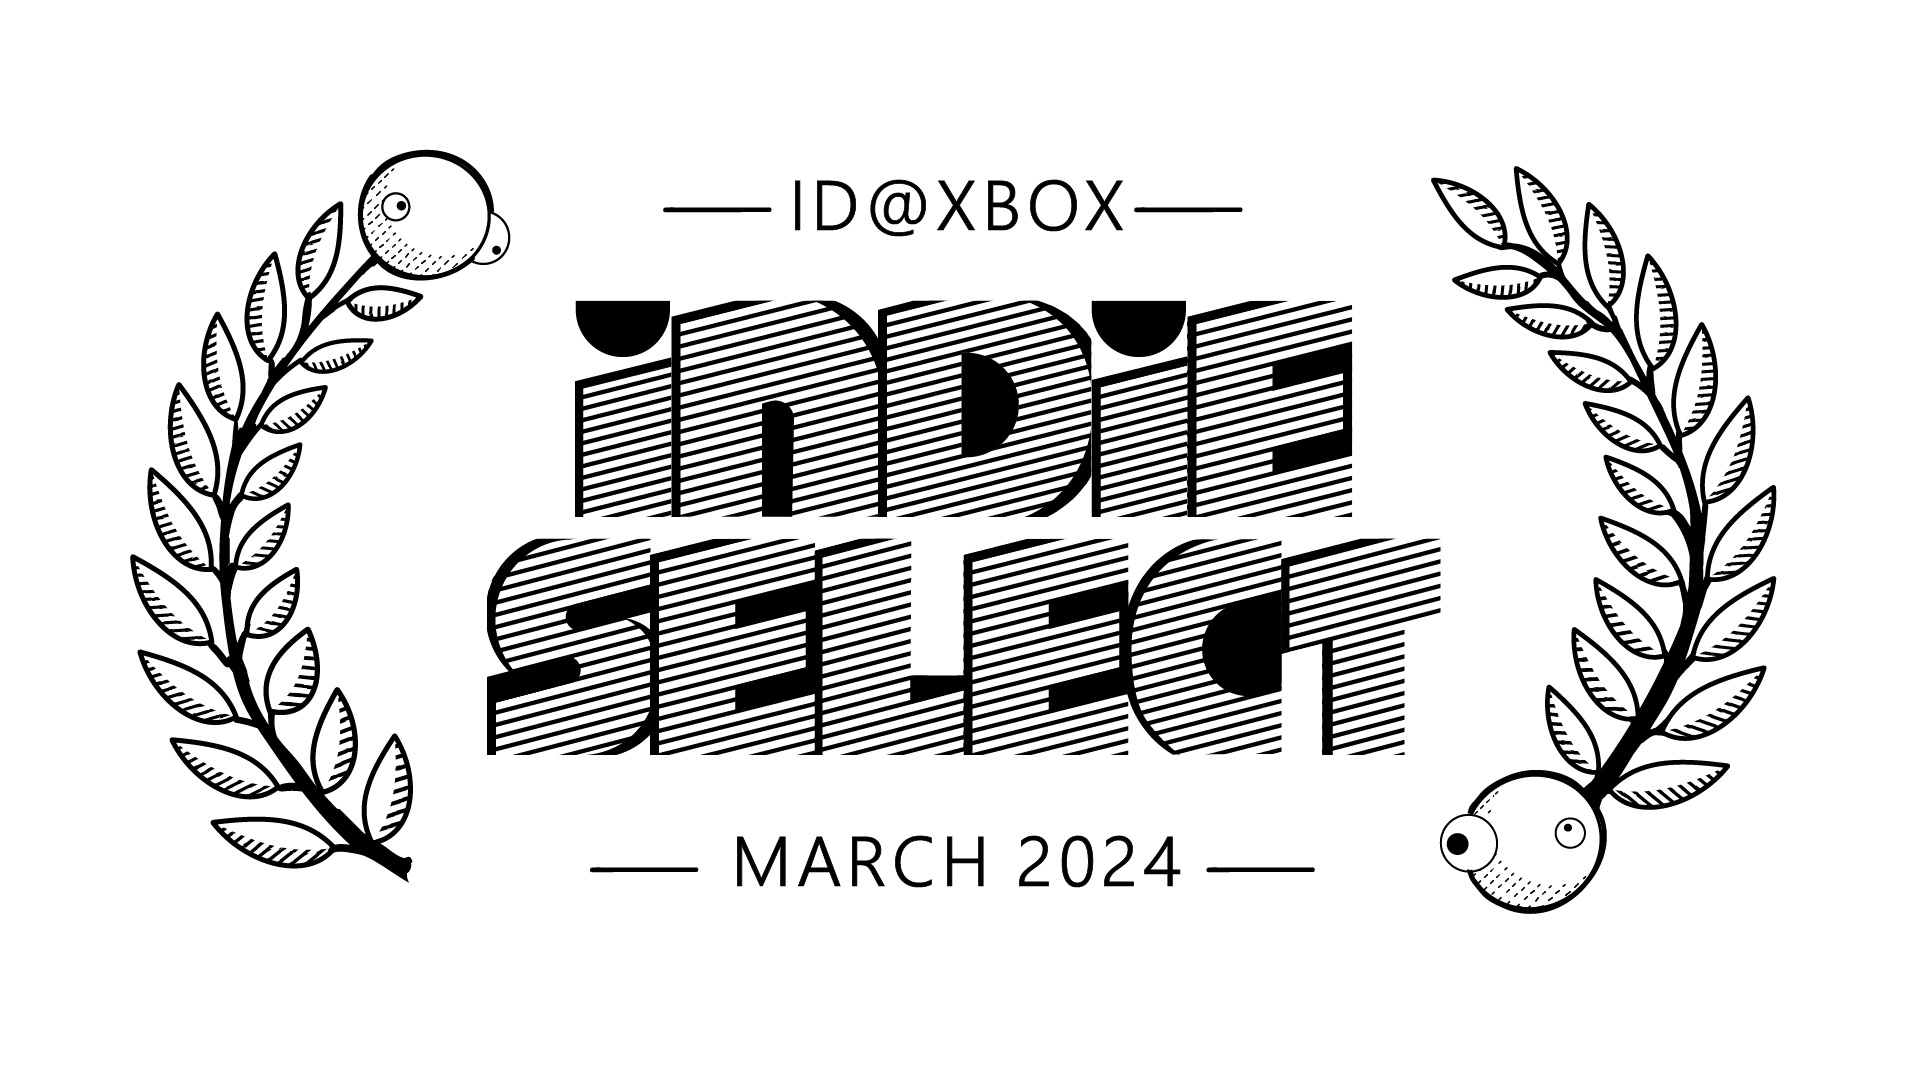 Indie Selects for March 2024: The ID@Xbox Team Serves Up Another Batch of Outstanding Indies